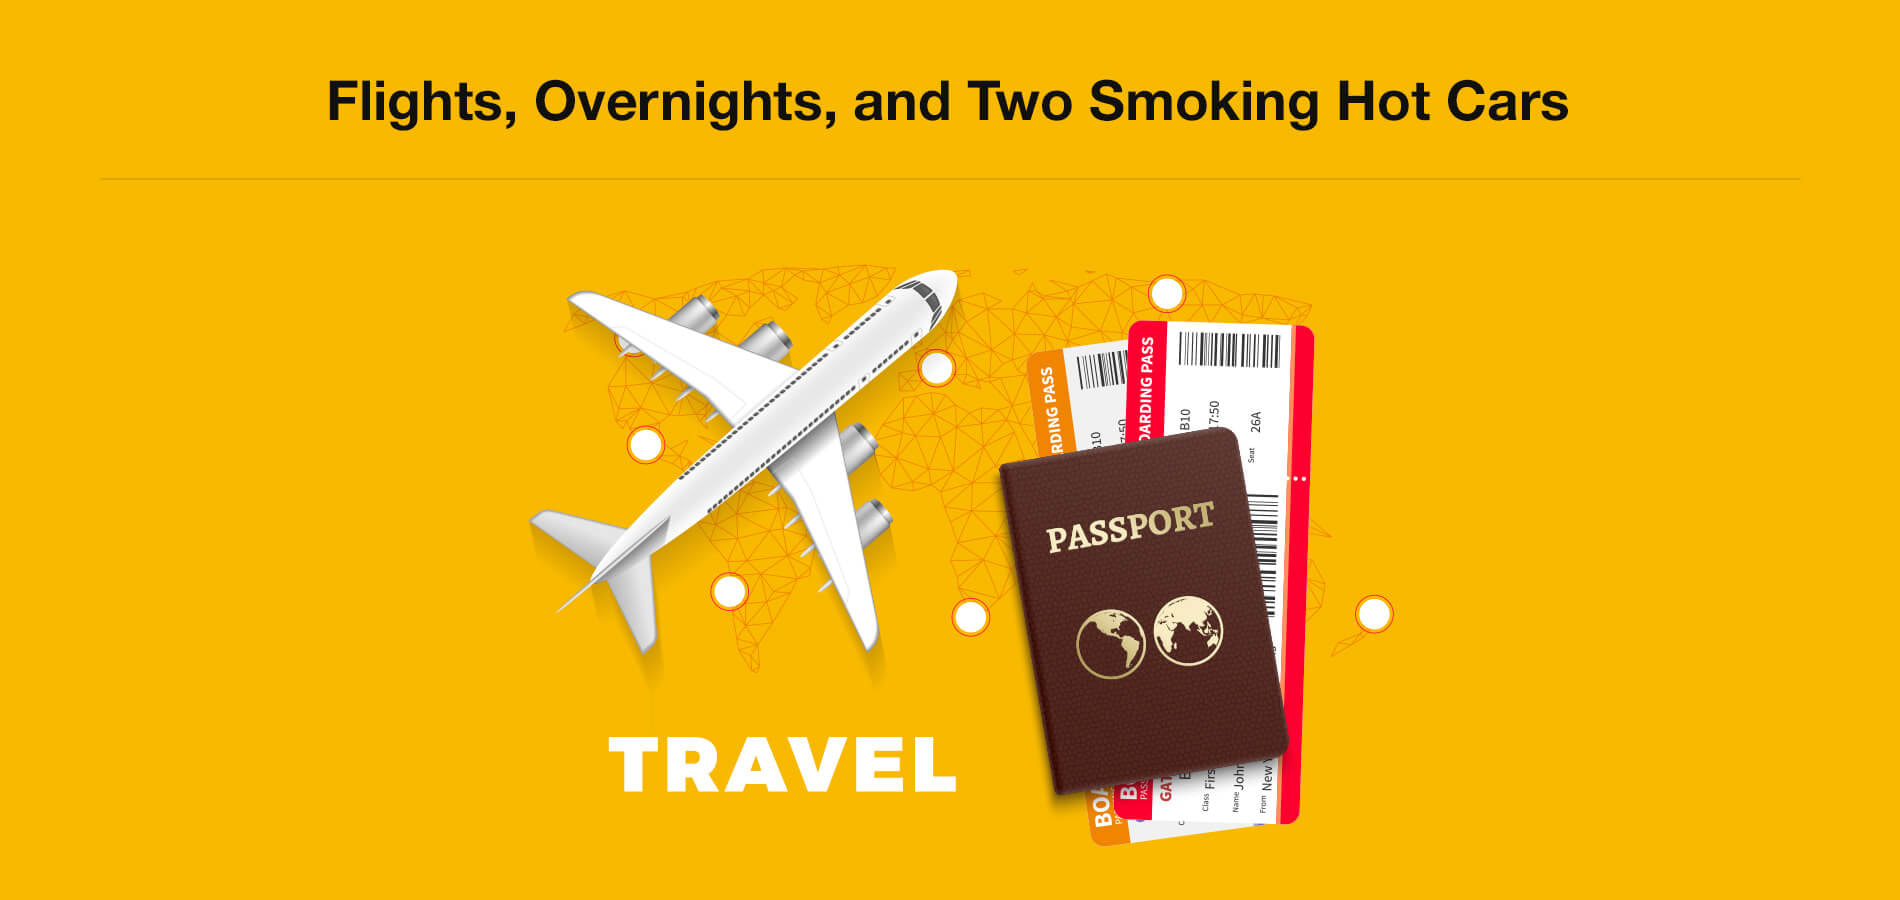 Flights, Overnights, and Two Smoking Hot Cars